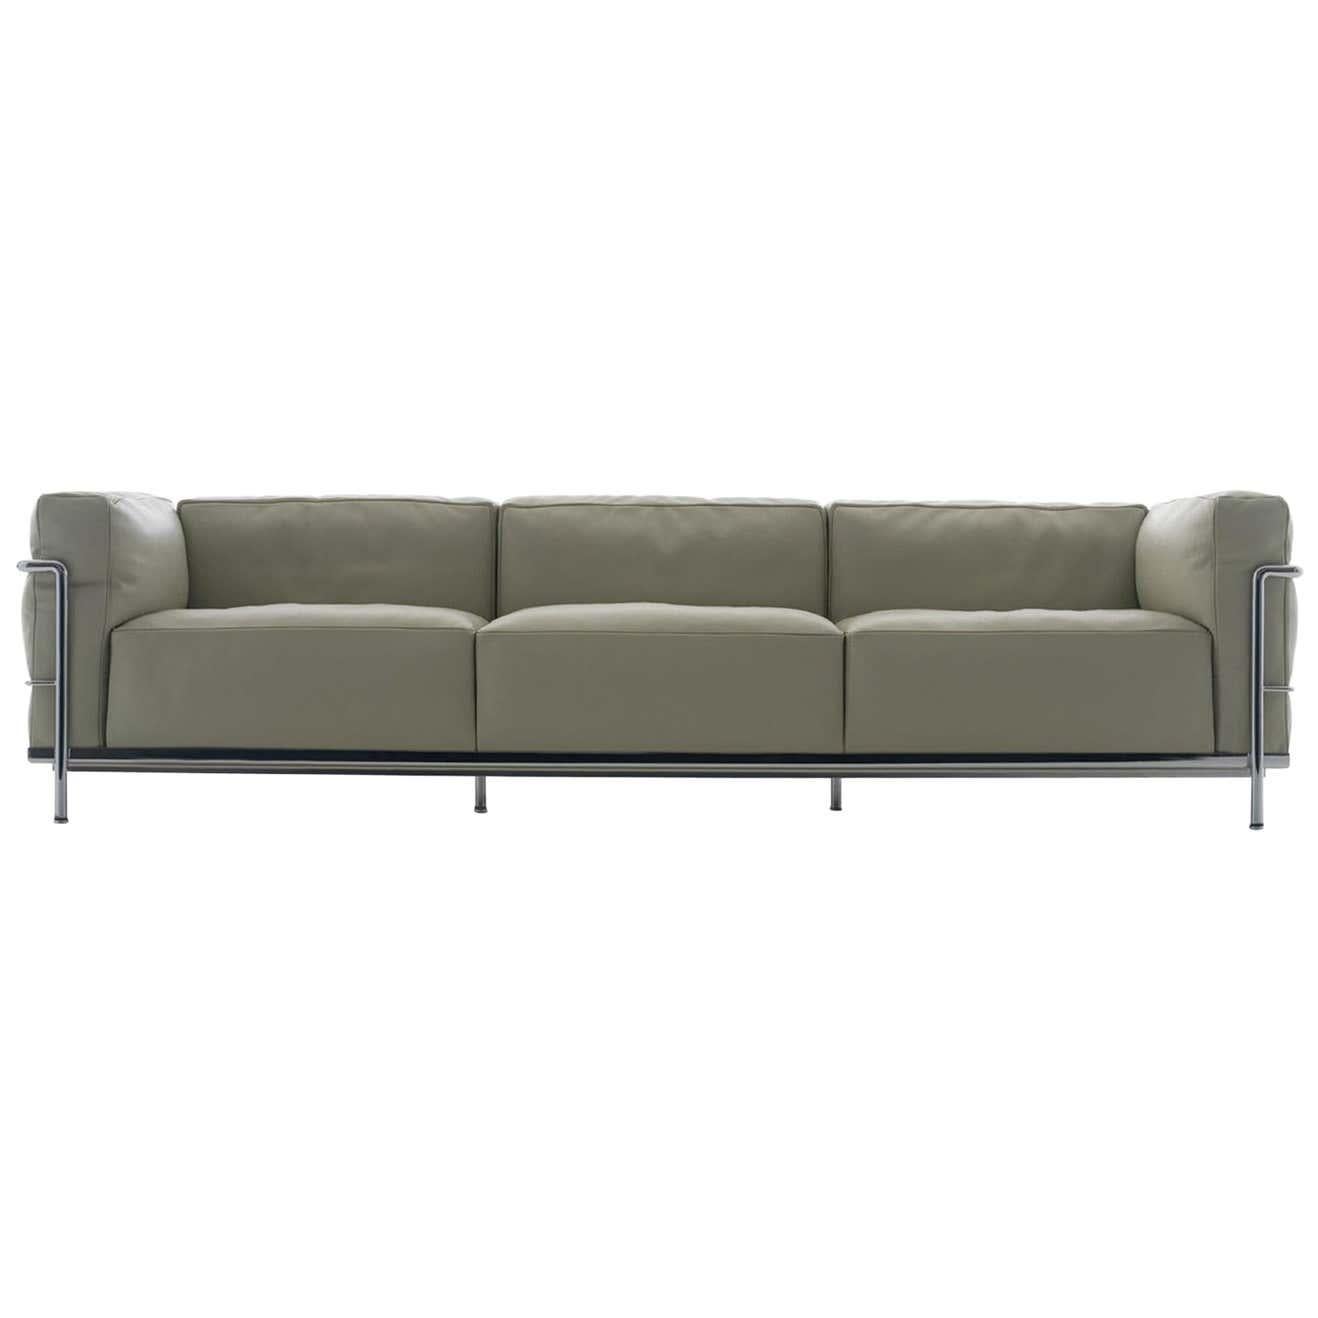 Mid-Century Modern Le Corbusier, P. Jeanneret, Charlotte Perriand LC3 Divano Sofa by Cassina For Sale